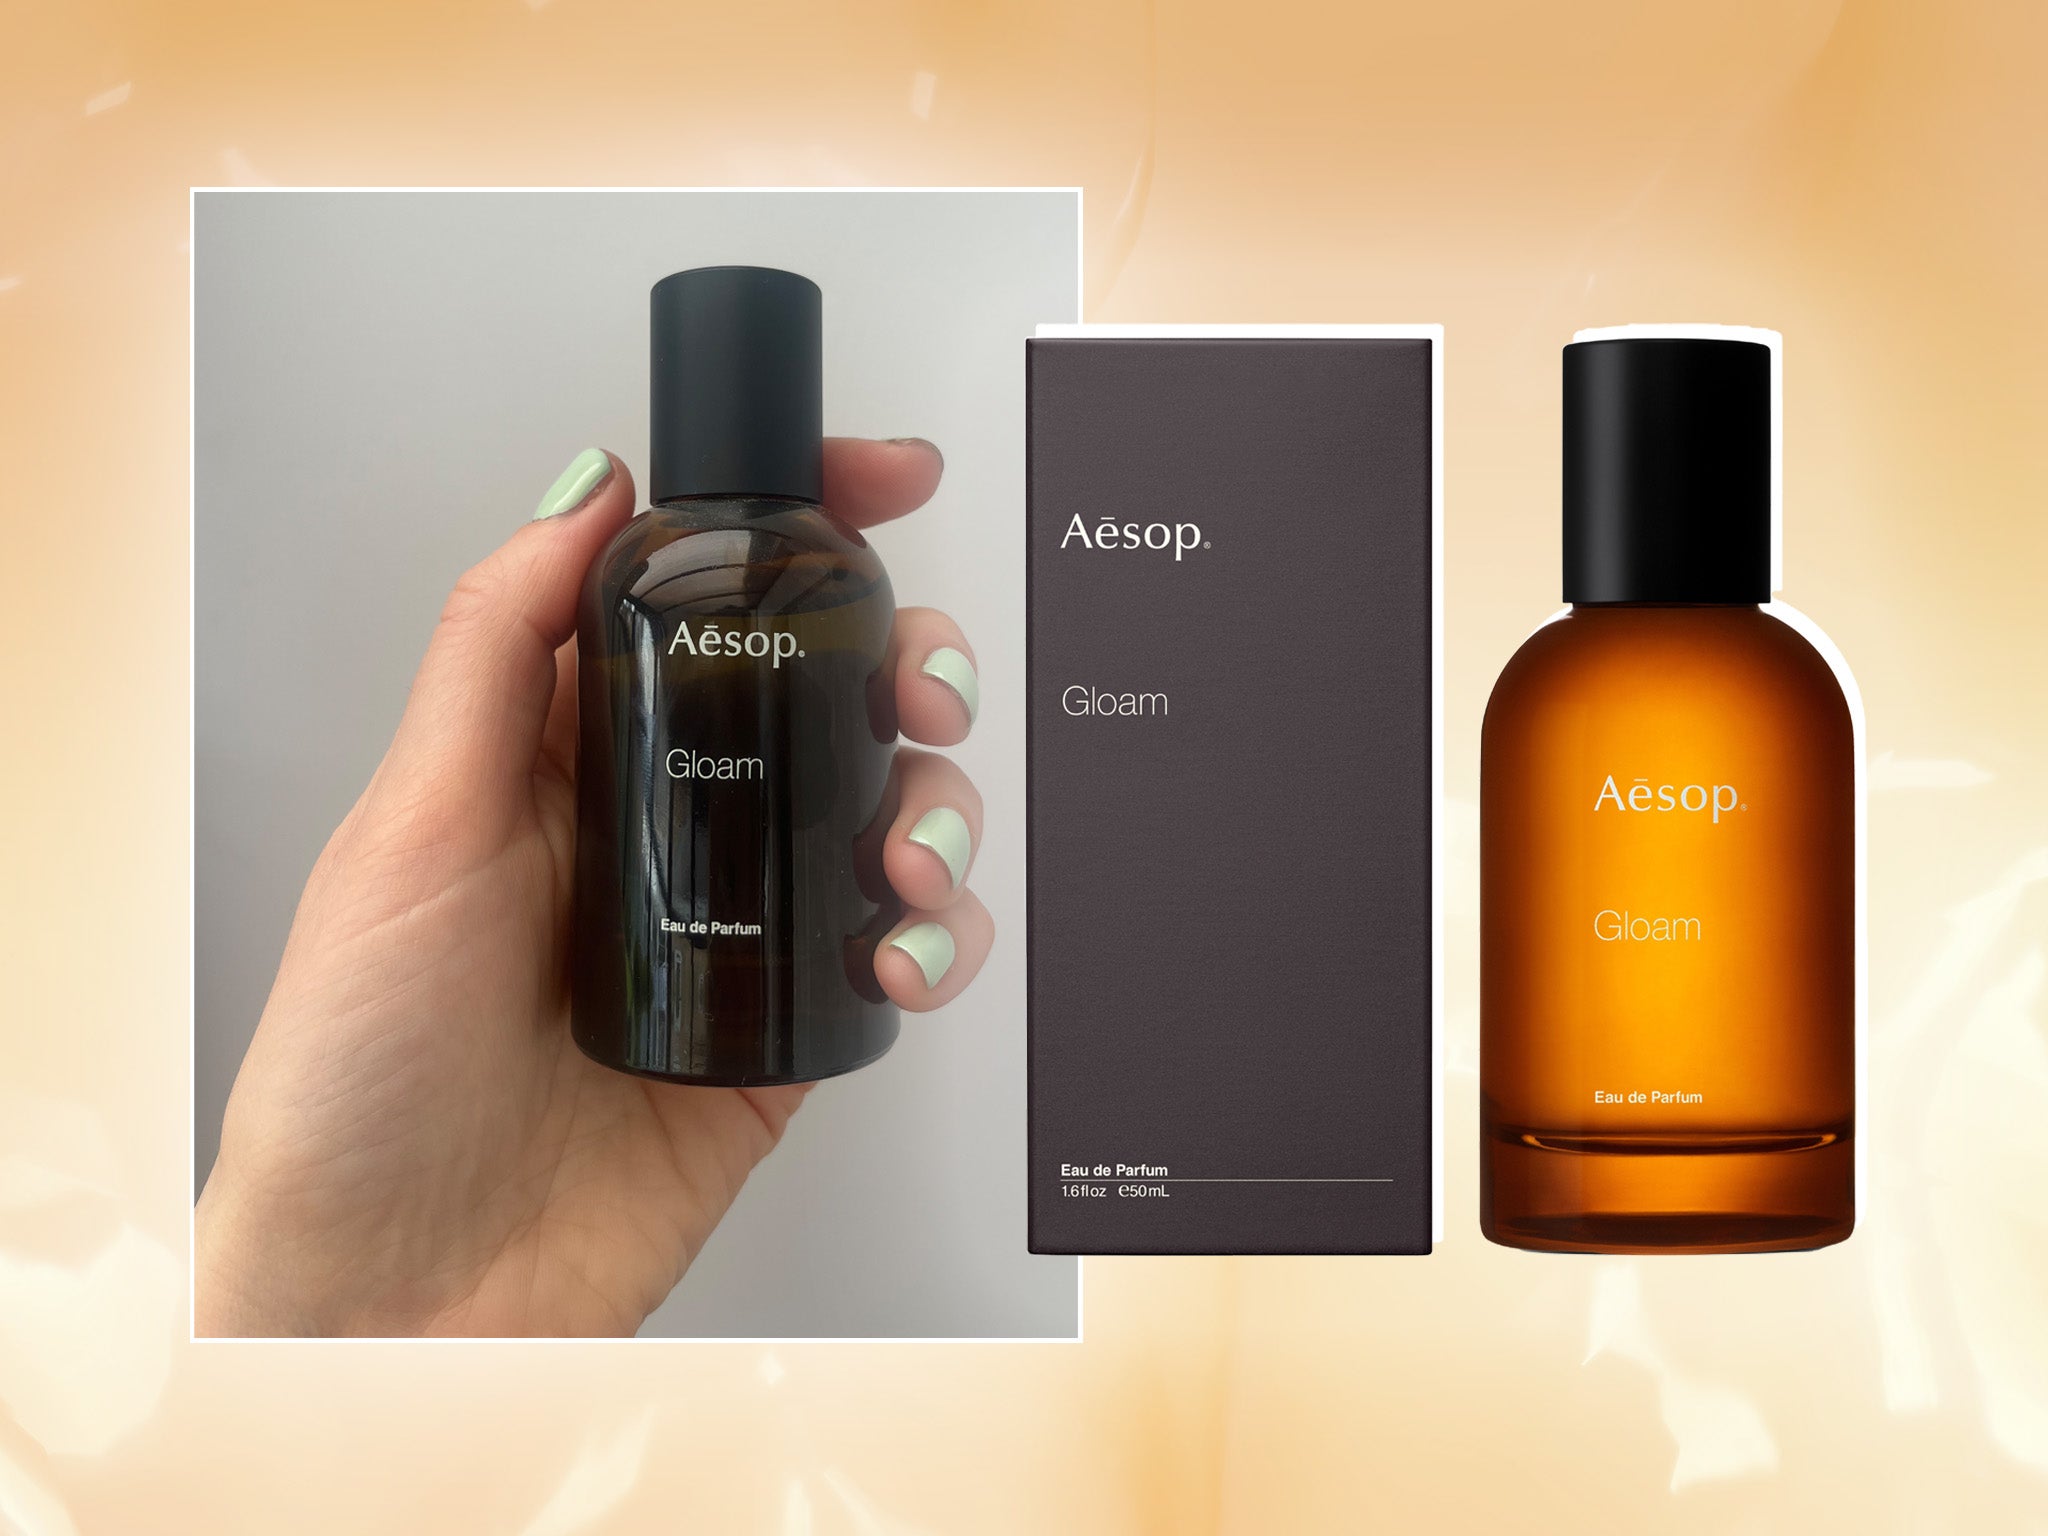 Our tester tried the spicy perfume ahead of its launch date